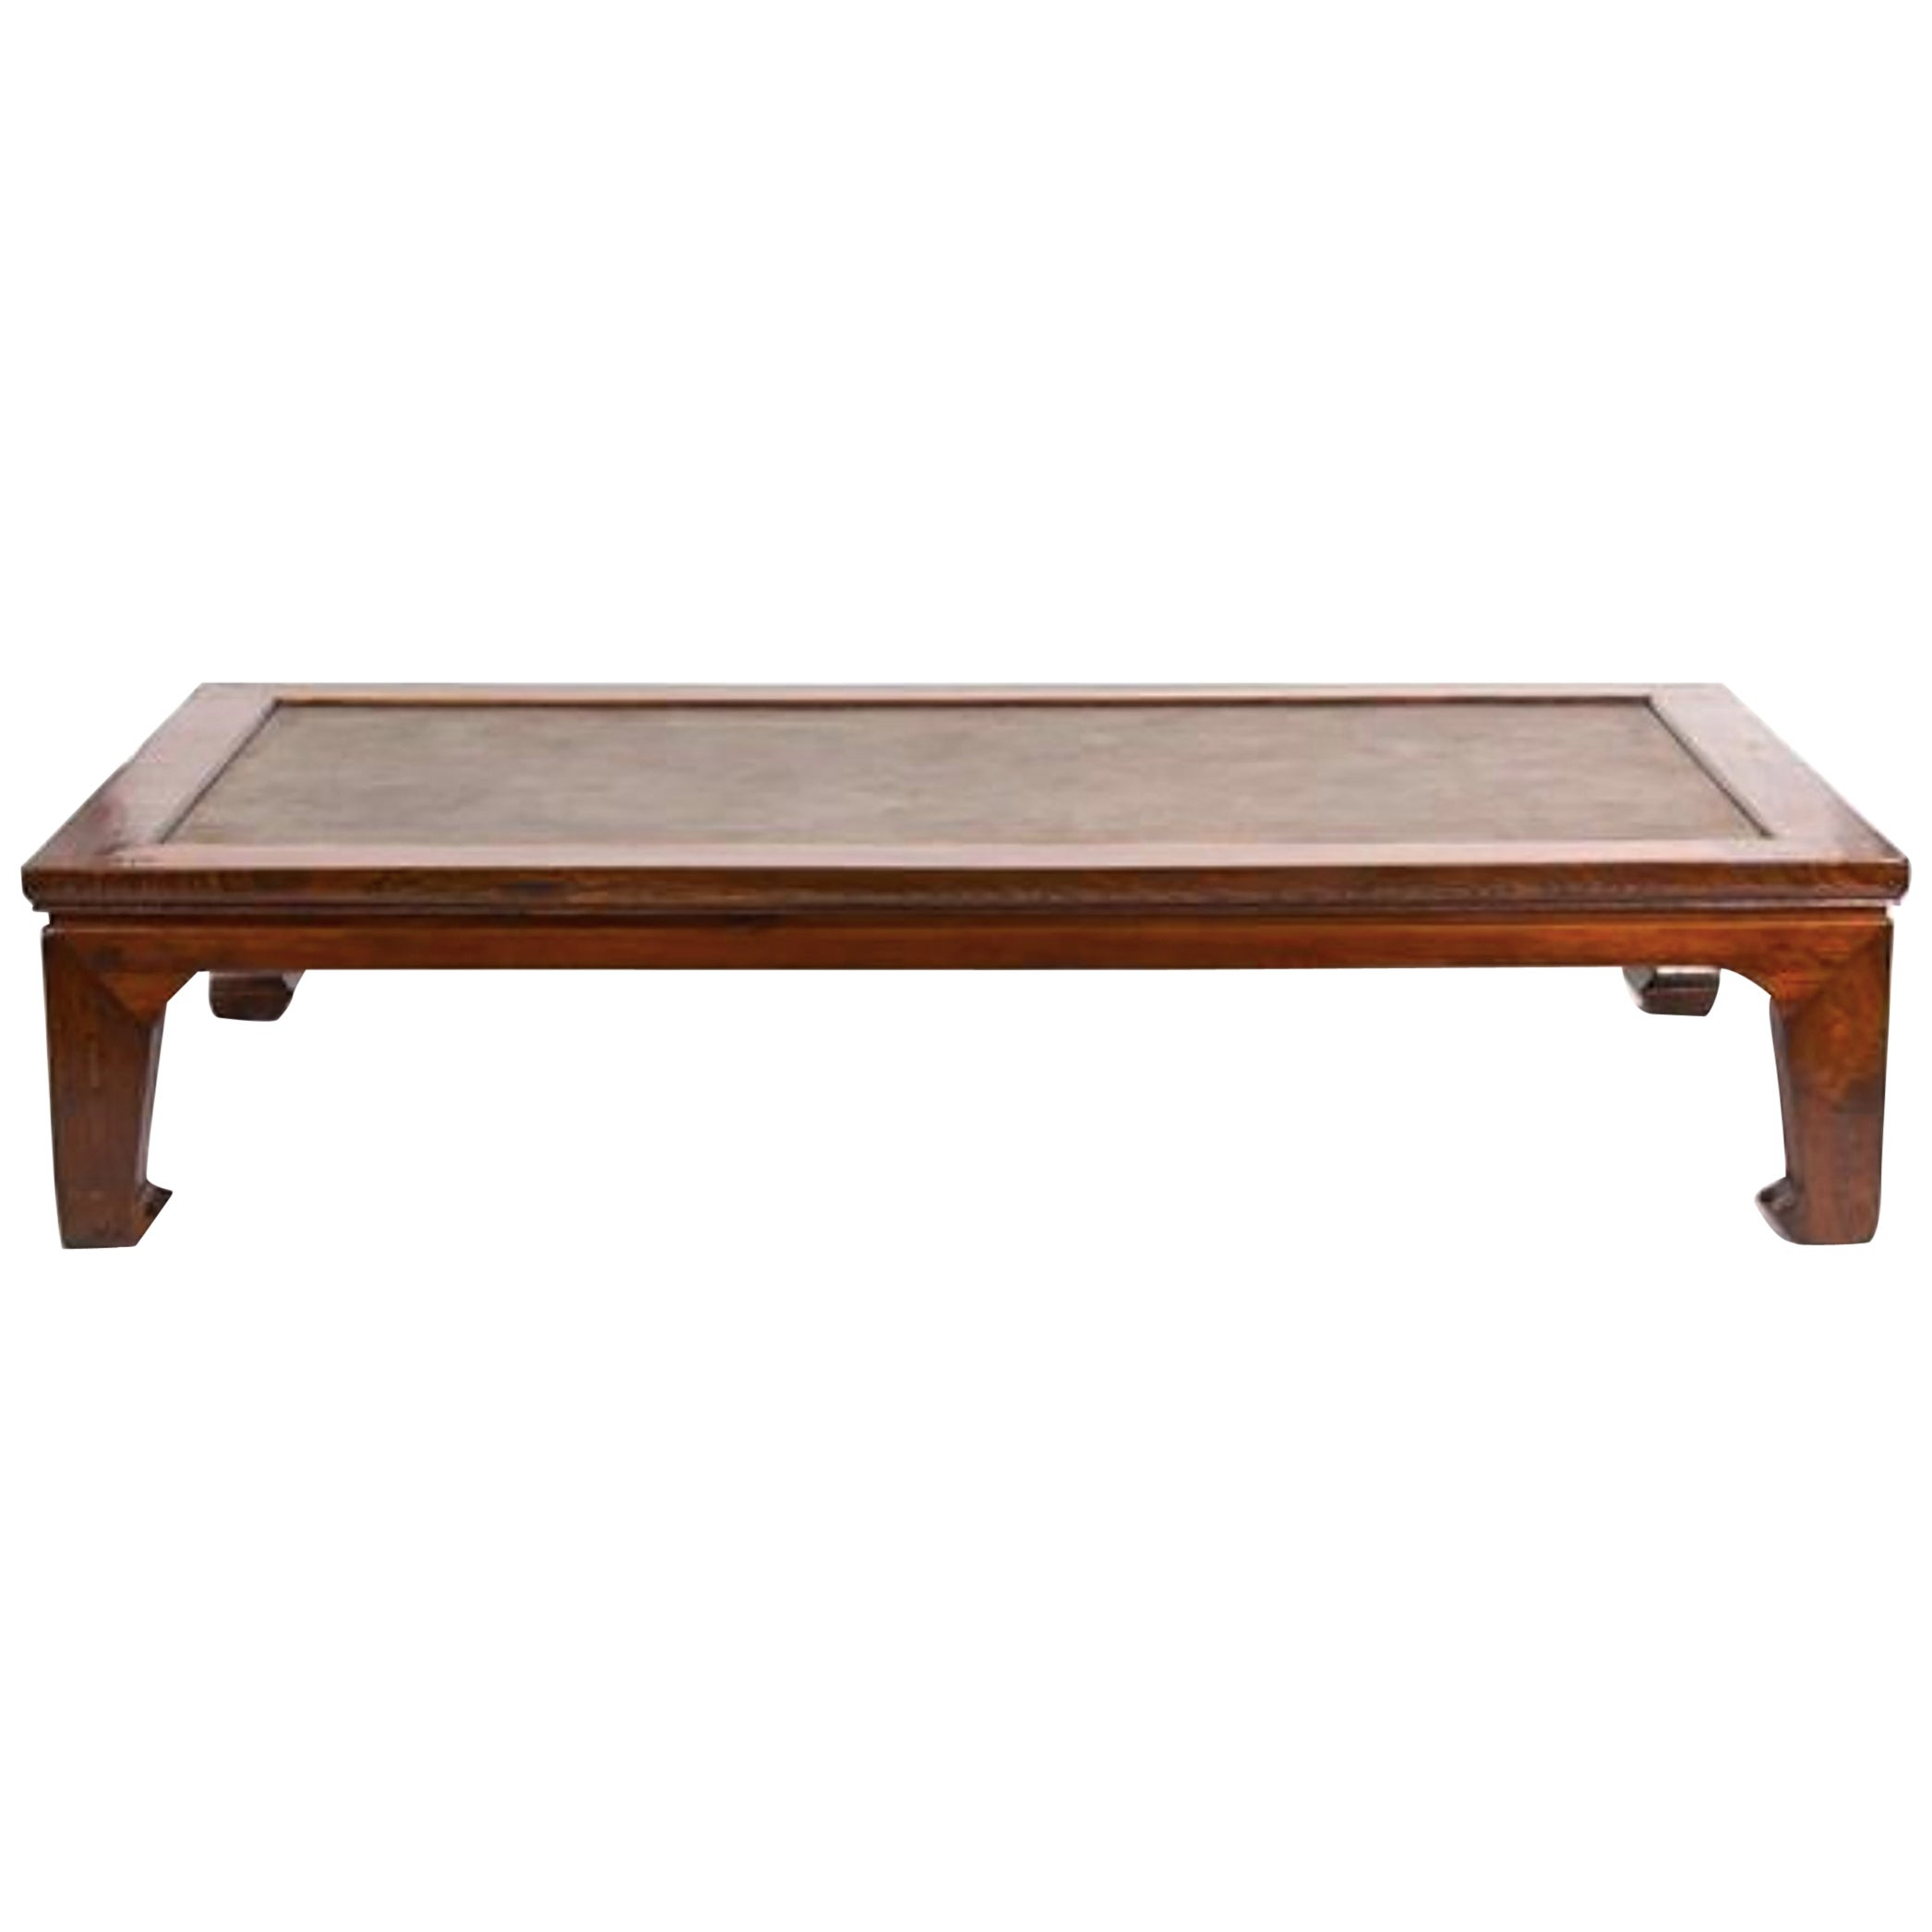 Asian Style Coffee Table With Inset Woven Cane Top At 1stdibs with size 2093 X 2093